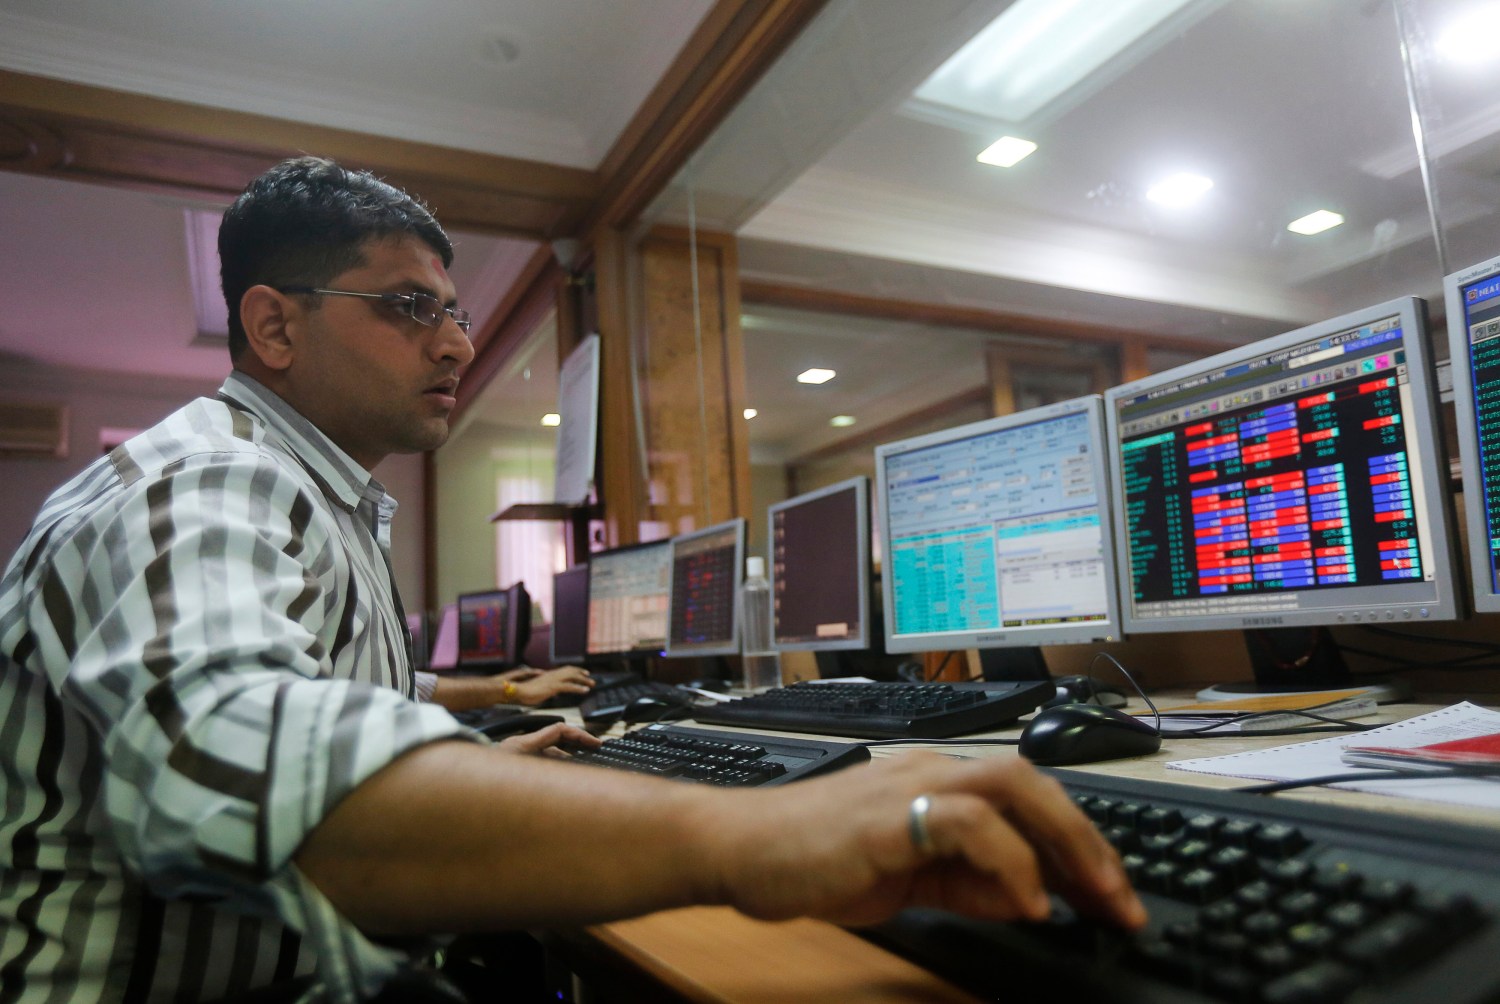 A broker trades on his computer terminal at a stock brokerage firm in Mumbai, India, January 20, 2016. Indian stocks dropped to their weakest since before the election of Prime Minister Narendra Modi while the rupee slumped to 2013 crisis levels on increasing concerns the country will be hit hard by the growing turmoil in global markets. REUTERS/Shailesh Andrade - D1BESIFXORAA